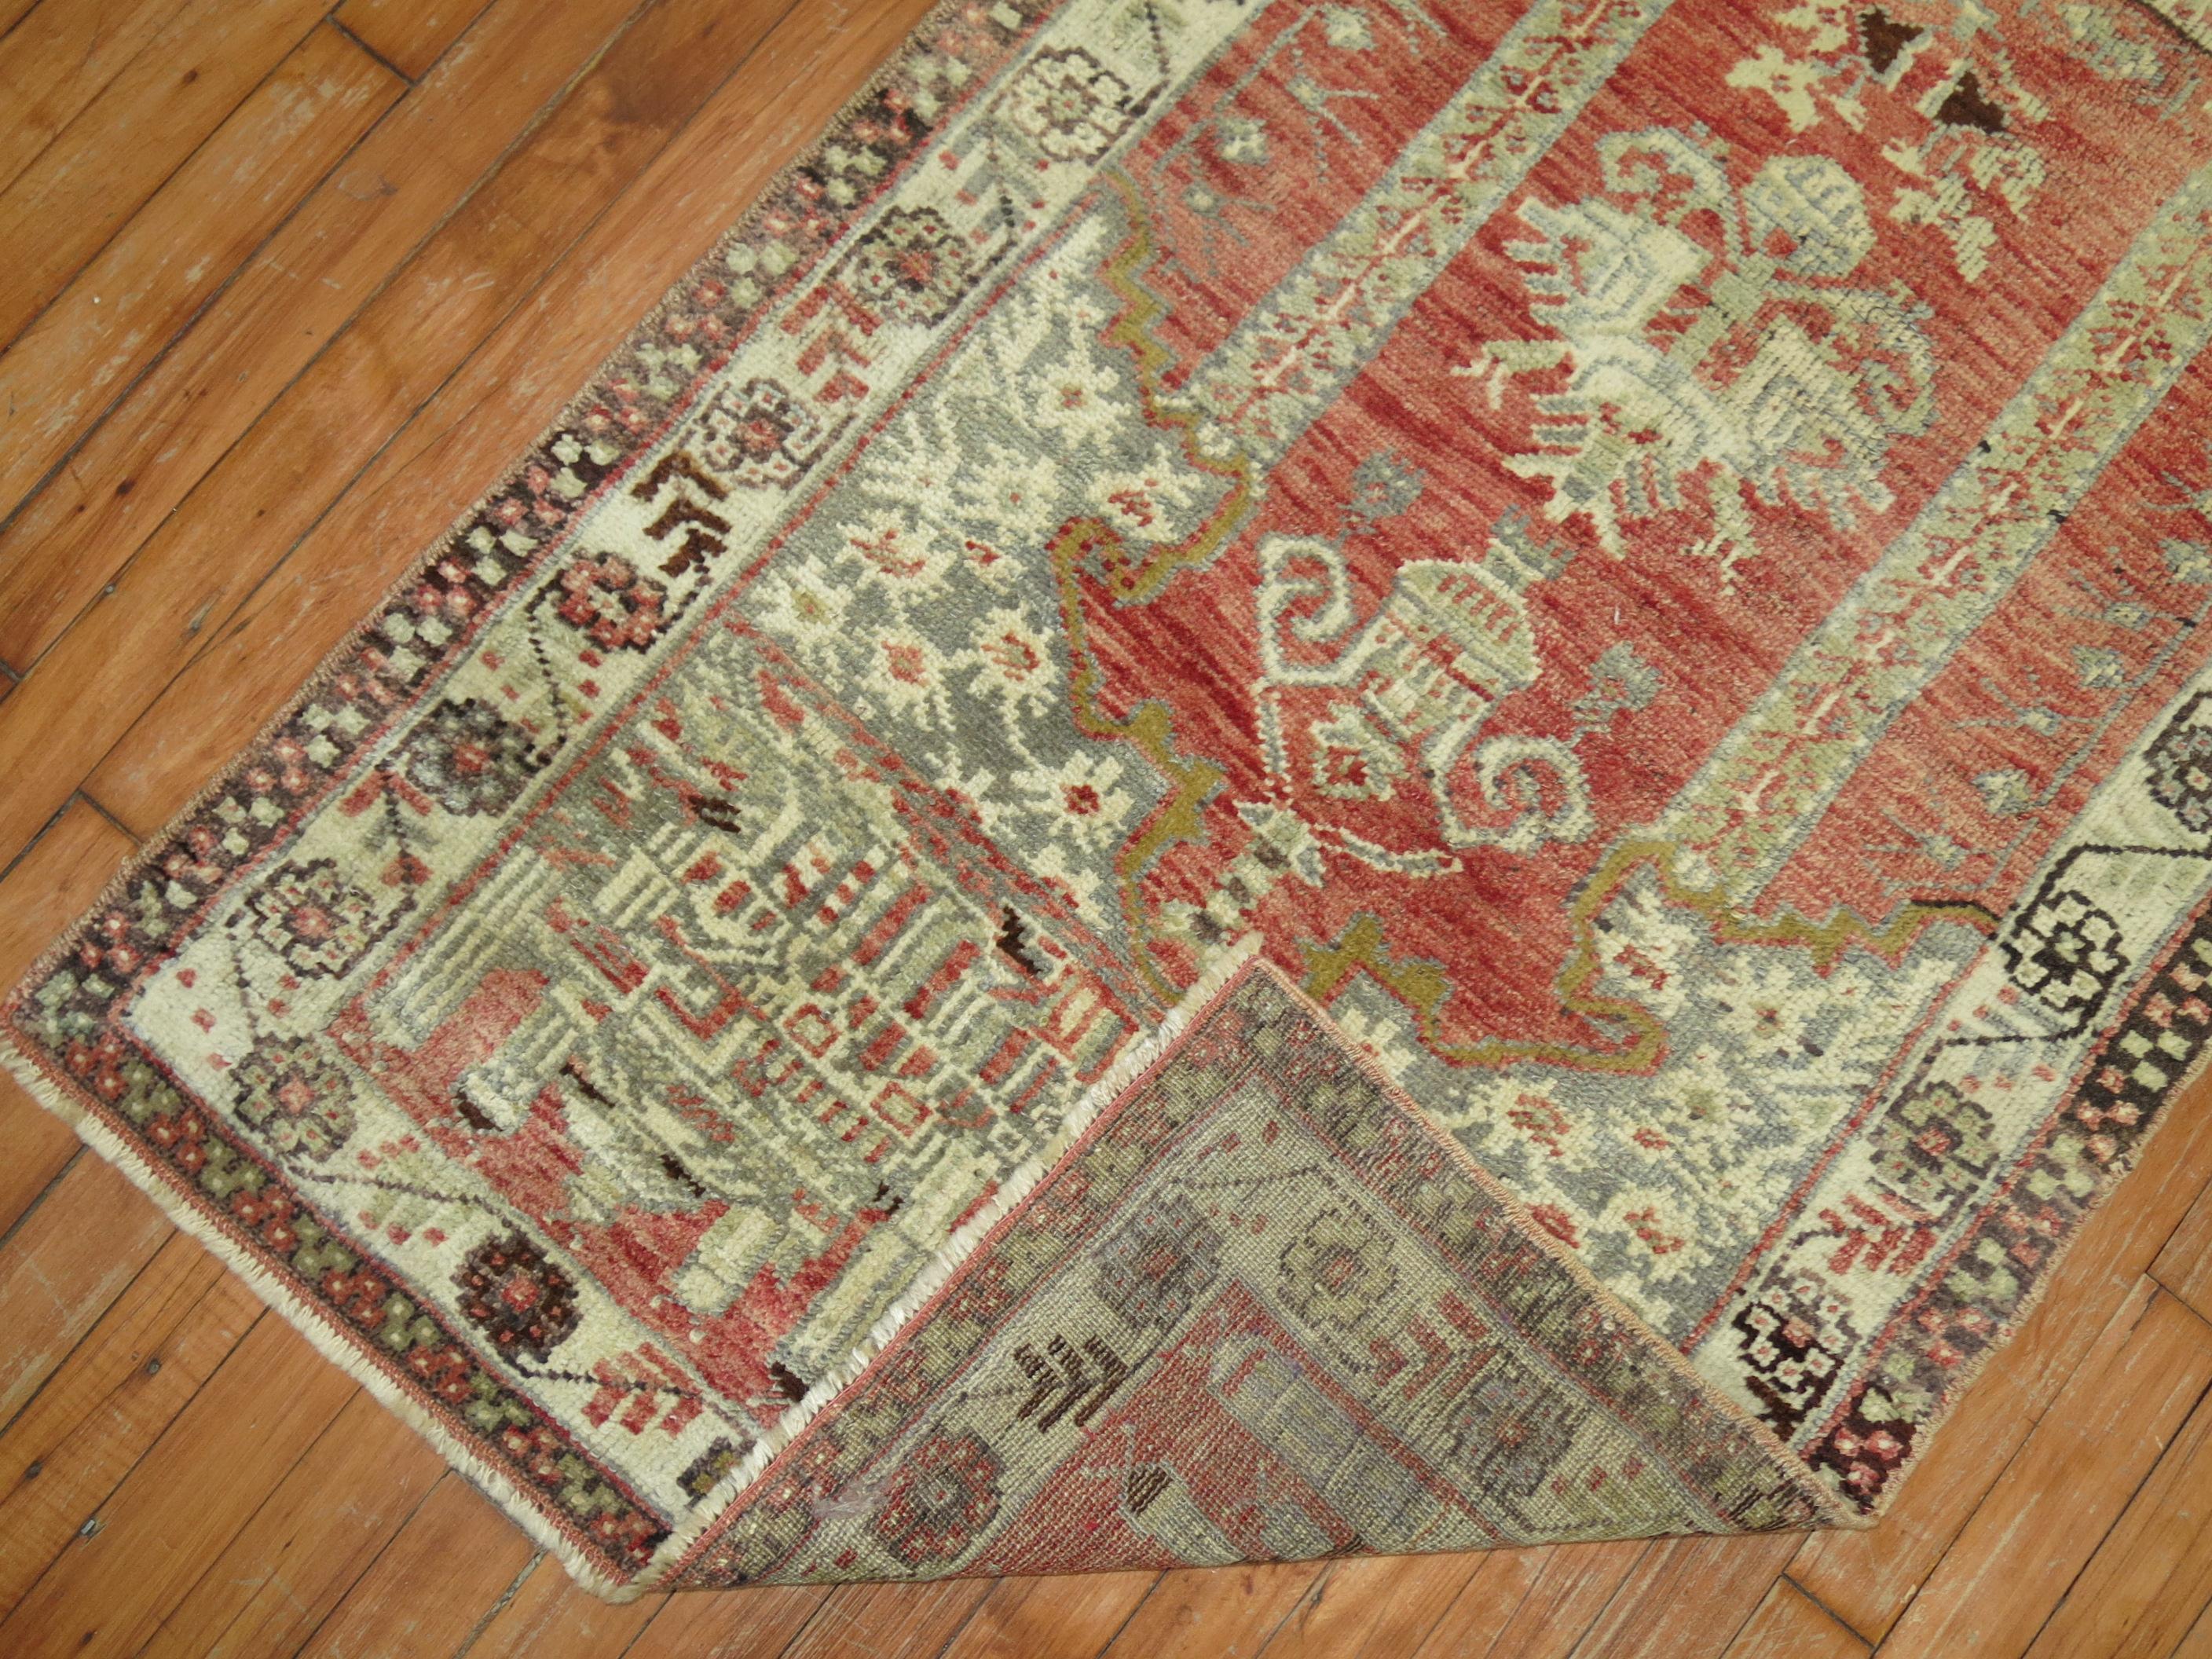 A handmade Turkish rug with a prayer niche design on a rosy red field.

Measures: 2'9